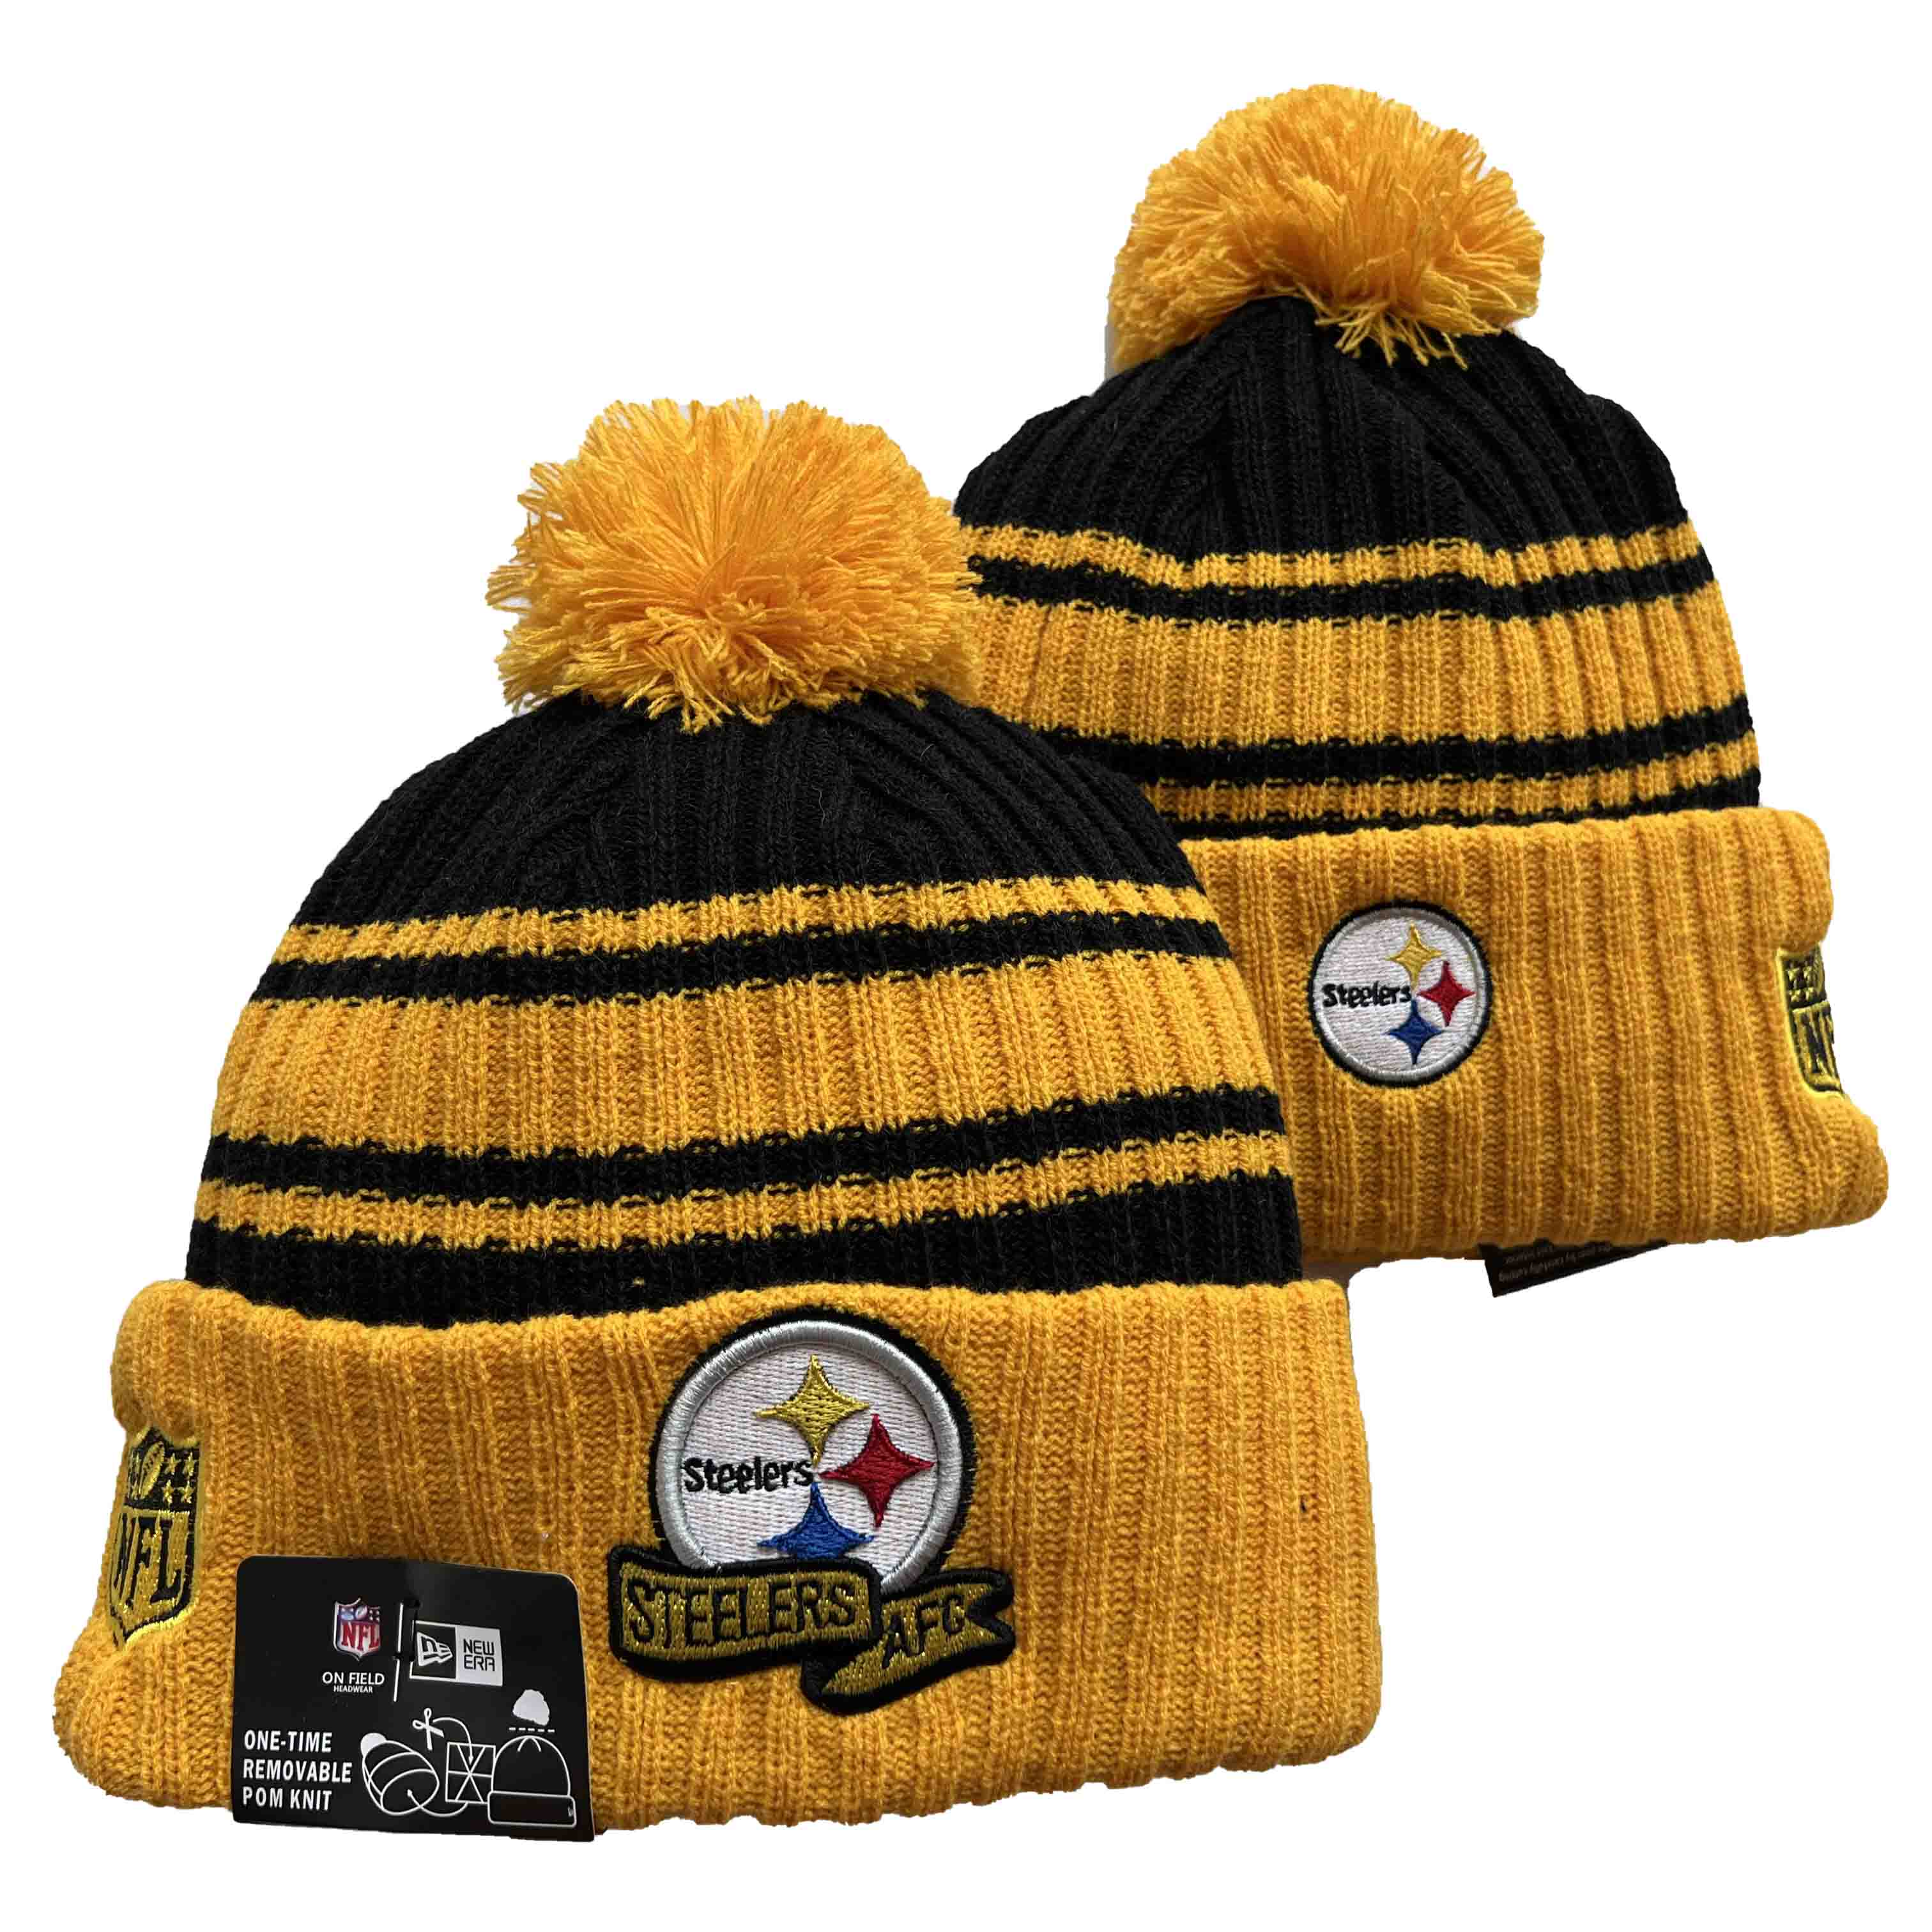 NFL Pittsburgh Steelers Beanies Knit Hats-YD1163